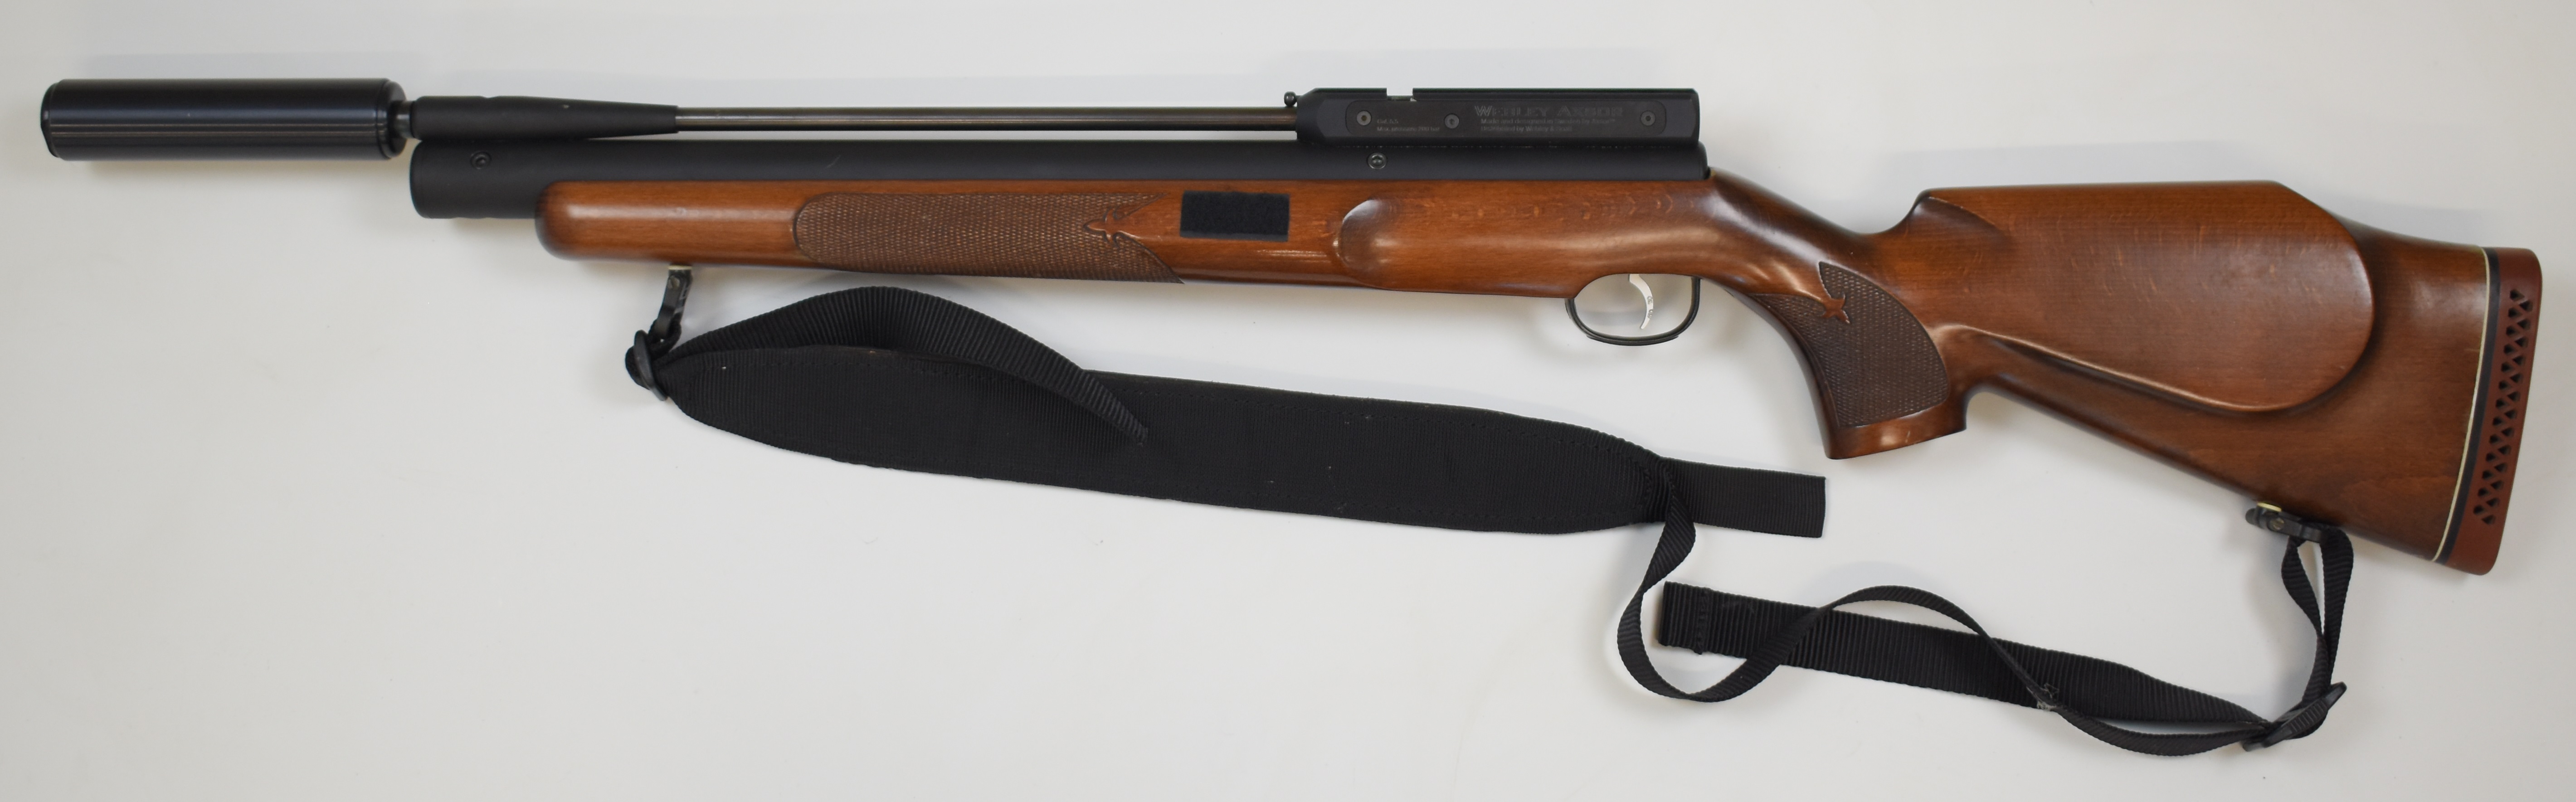 Webley Axsor .22 PCP air rifle with chequered semi-pistol grip and forend, raised cheek piece, - Image 16 of 20